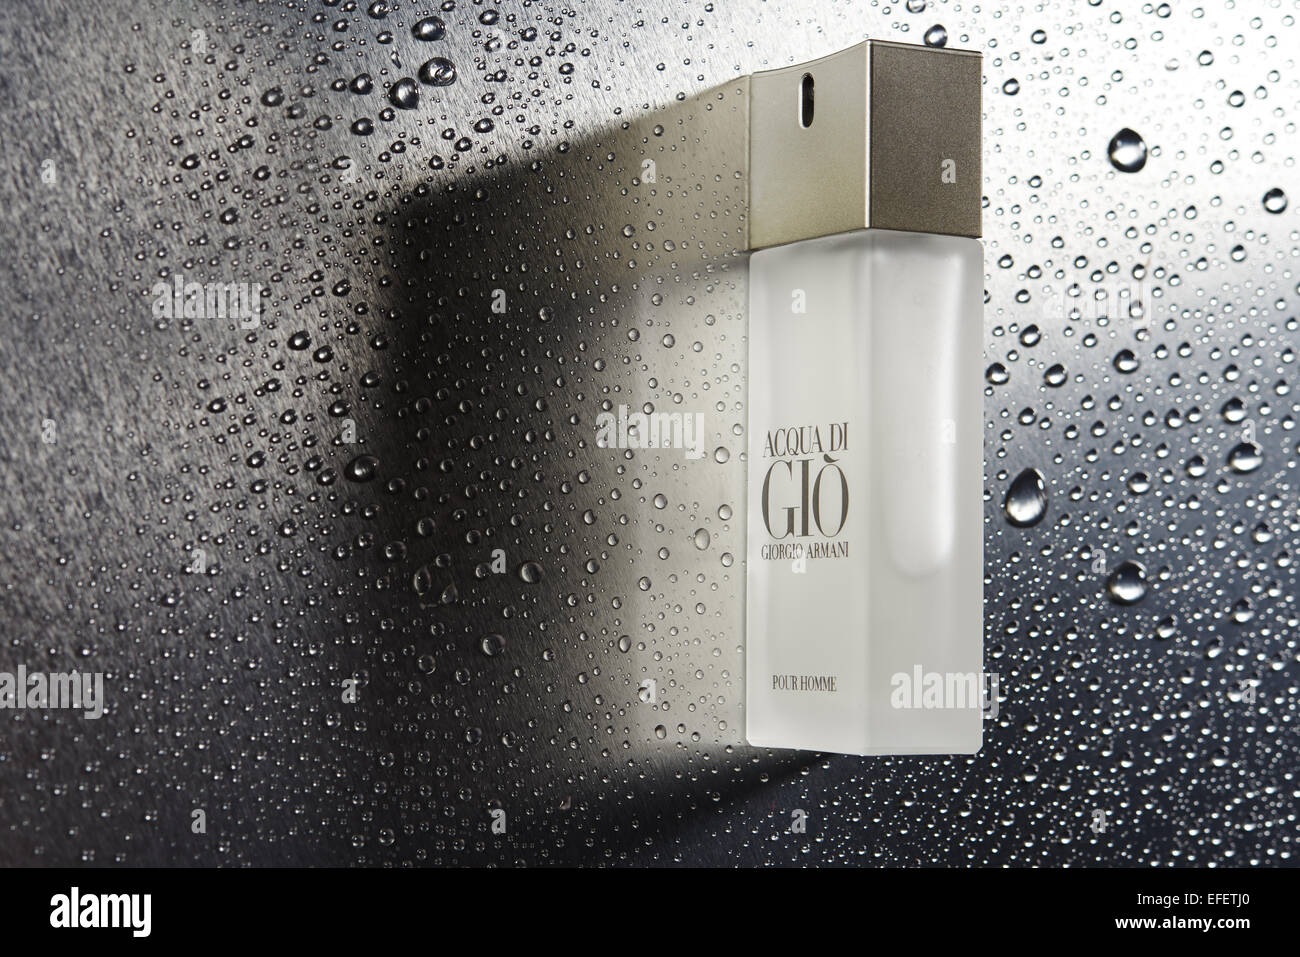 Armani Gio bottle with water droplets . Product Photography. Fragrance Stock Photo